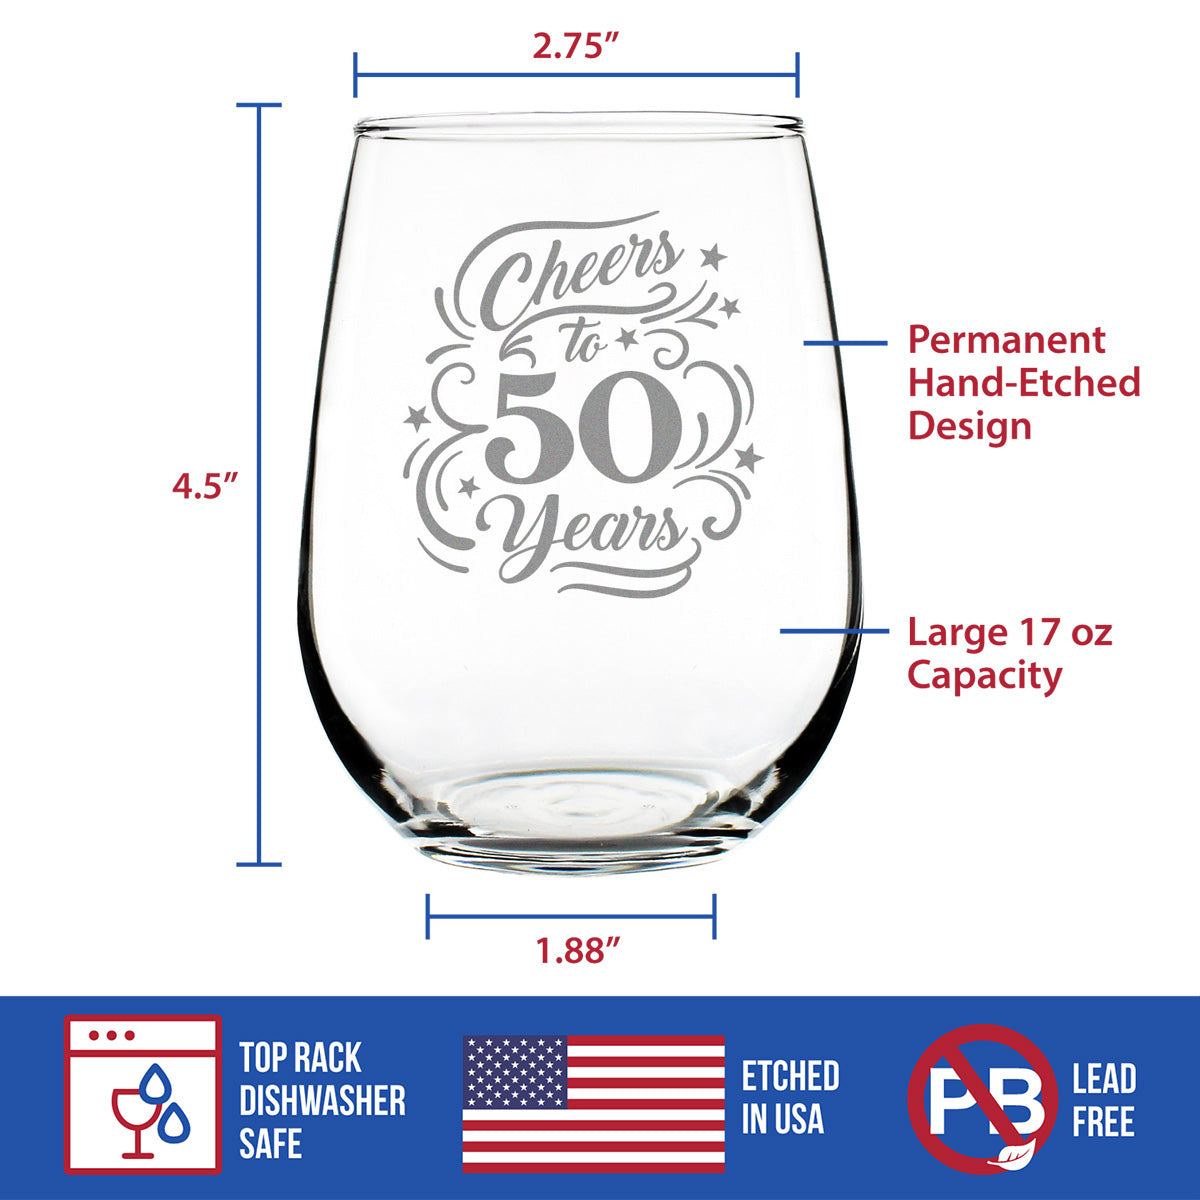 Cheers to 50 Years - Stemless Wine Glass Gifts for Women &amp; Men - 50th Anniversary or Birthday Party Decor - Large Glasses